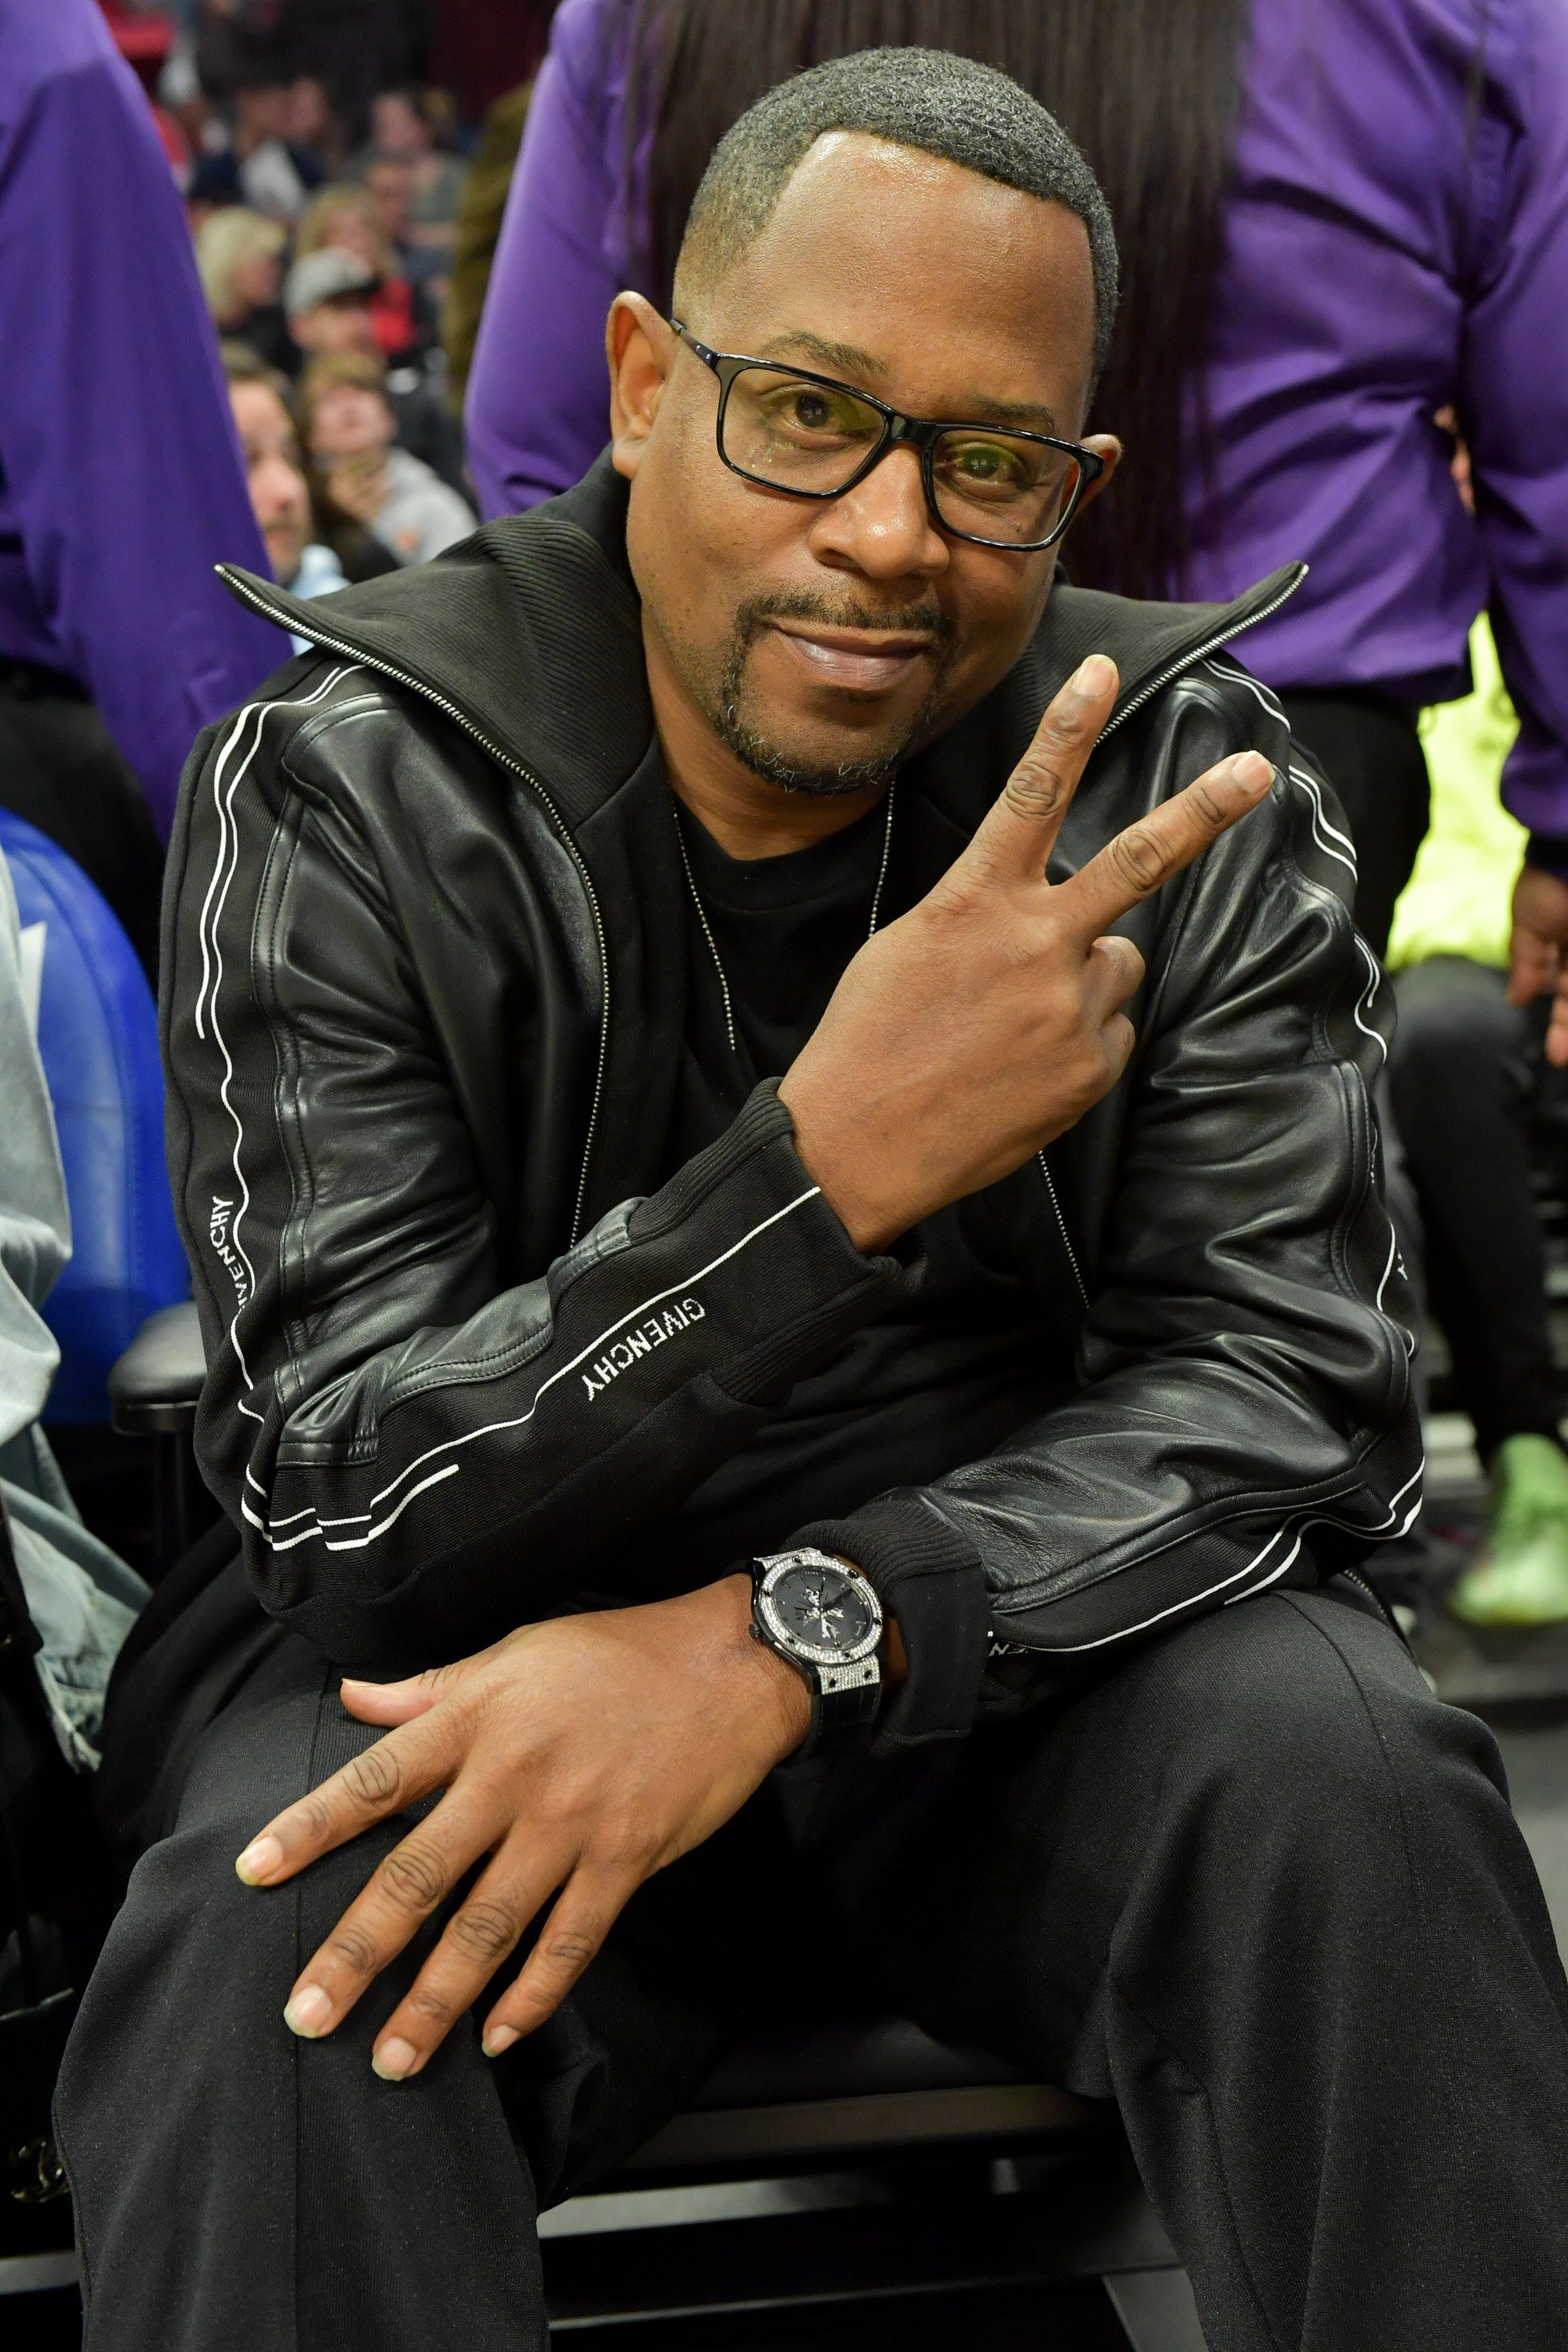 Martin Lawrence attends a basketball game between the Los Angeles Clippers and the Utah Jazz at Staples Center on December 28, 2019. | Photo: Getty Images